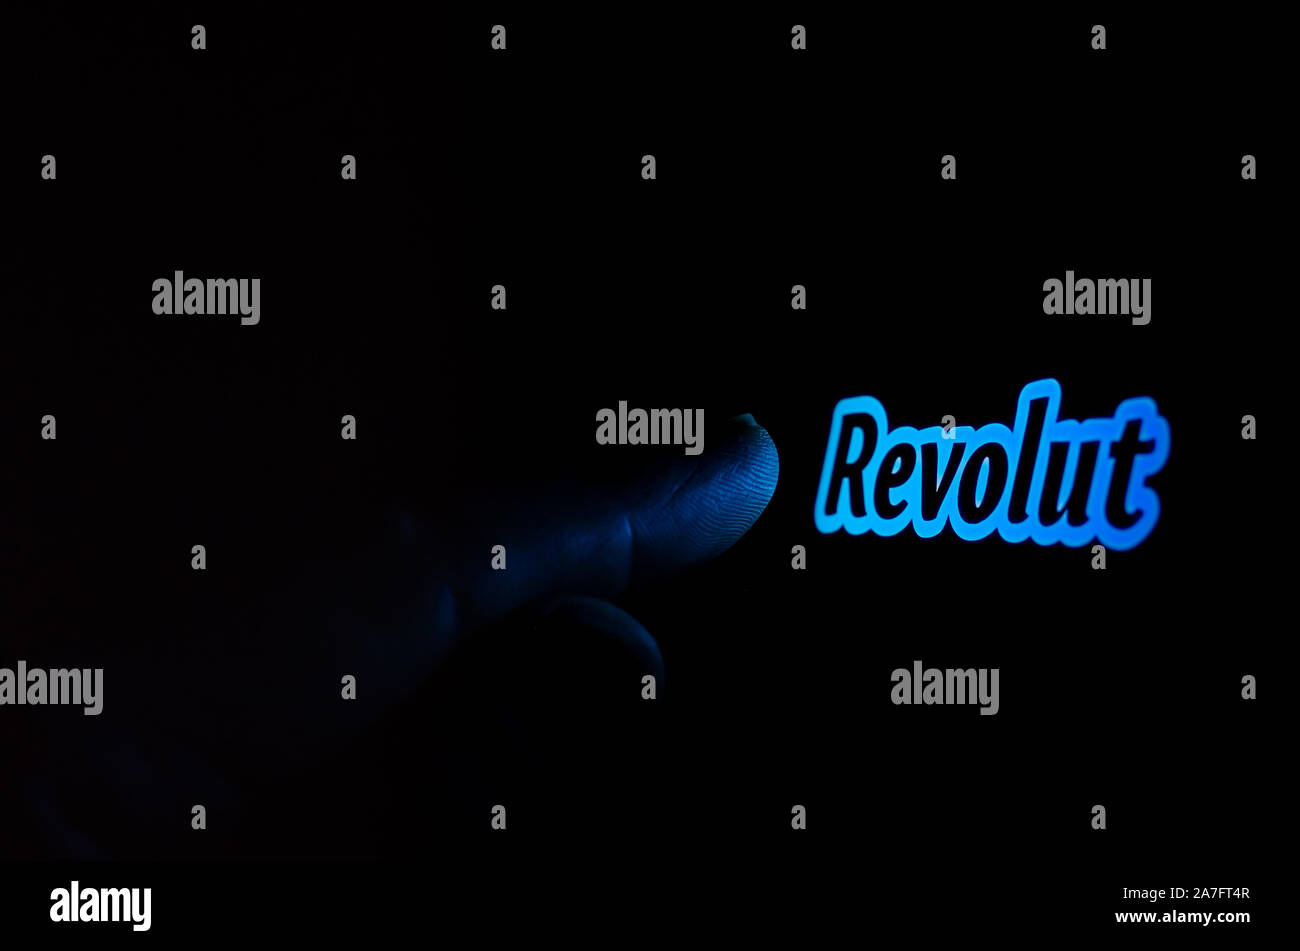 Revolut bank logo on a smartphone screen in a dark room and a finger touching it. Stock Photo